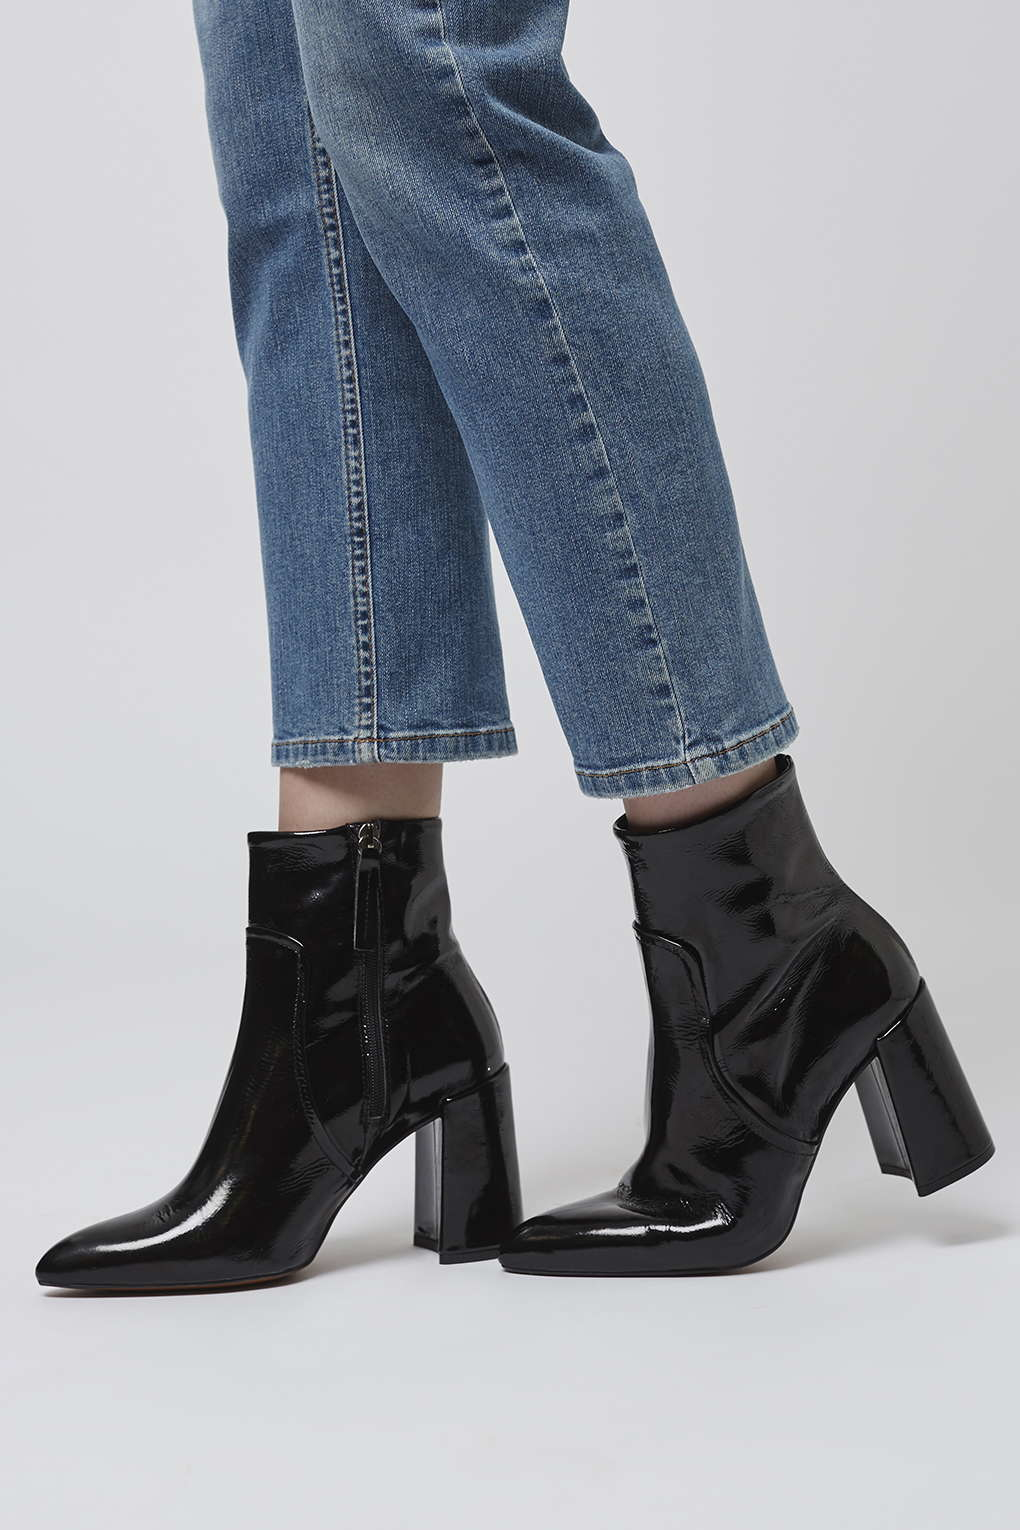 topshop patent leather boots